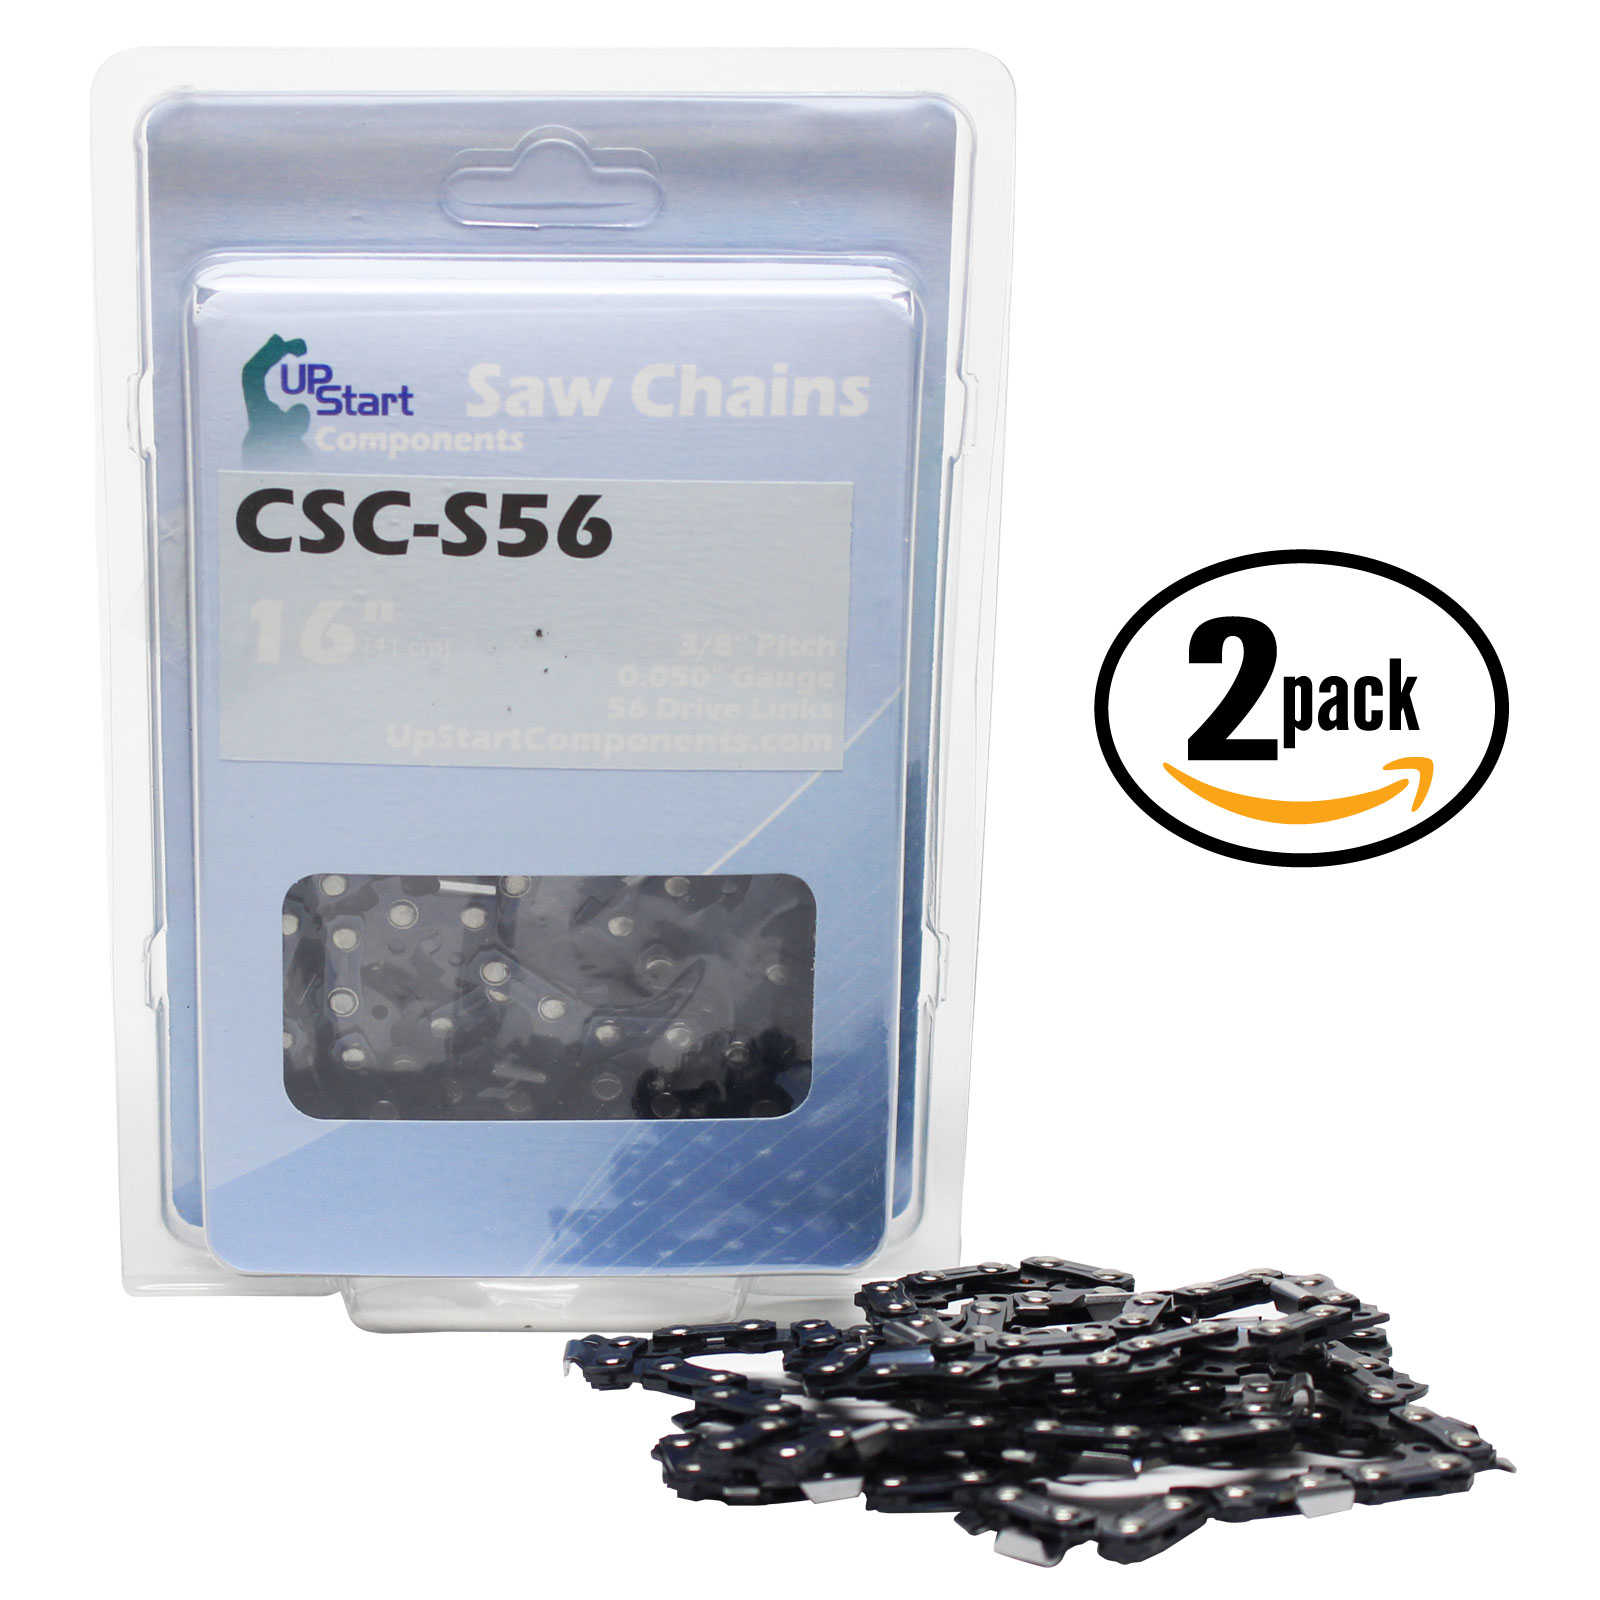 2-Pack 16' Semi Chisel Saw Chain for Oregon 91PX056G Chainsaws - (16 inch, 3/8' Low Profile Pitch, 0.050' Gauge, 56 Drive Links, CSC-S56)